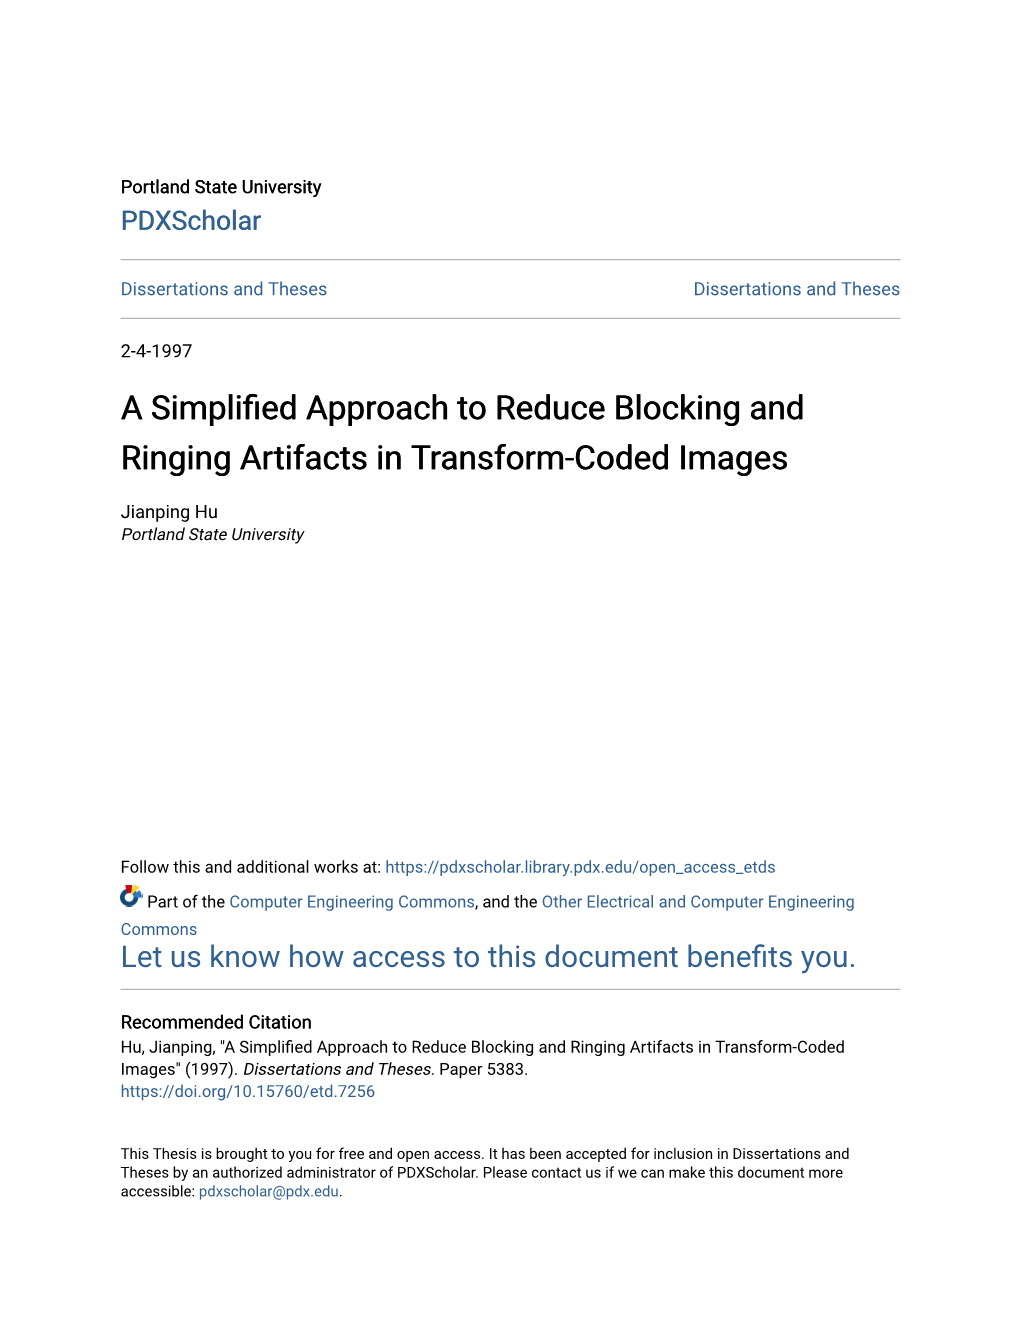 A Simplified Approach to Reduce Blocking and Ringing Artifacts in Transform-Coded Images